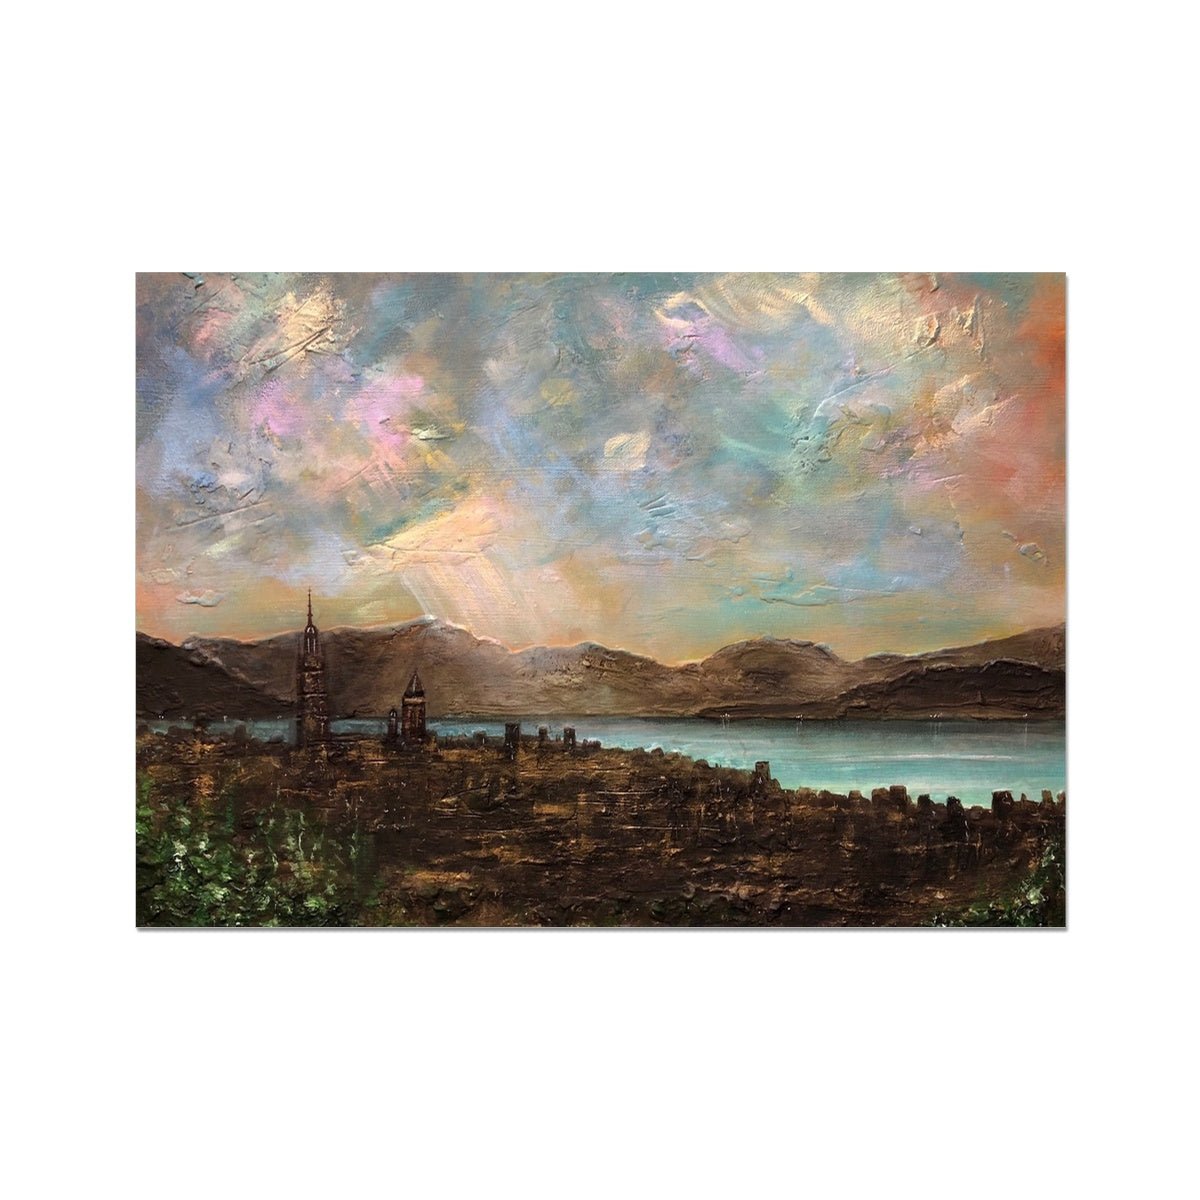 Angels Fingers Over Greenock Painting | Fine Art Prints From Scotland-Unframed Prints-River Clyde Art Gallery-A2 Landscape-Paintings, Prints, Homeware, Art Gifts From Scotland By Scottish Artist Kevin Hunter